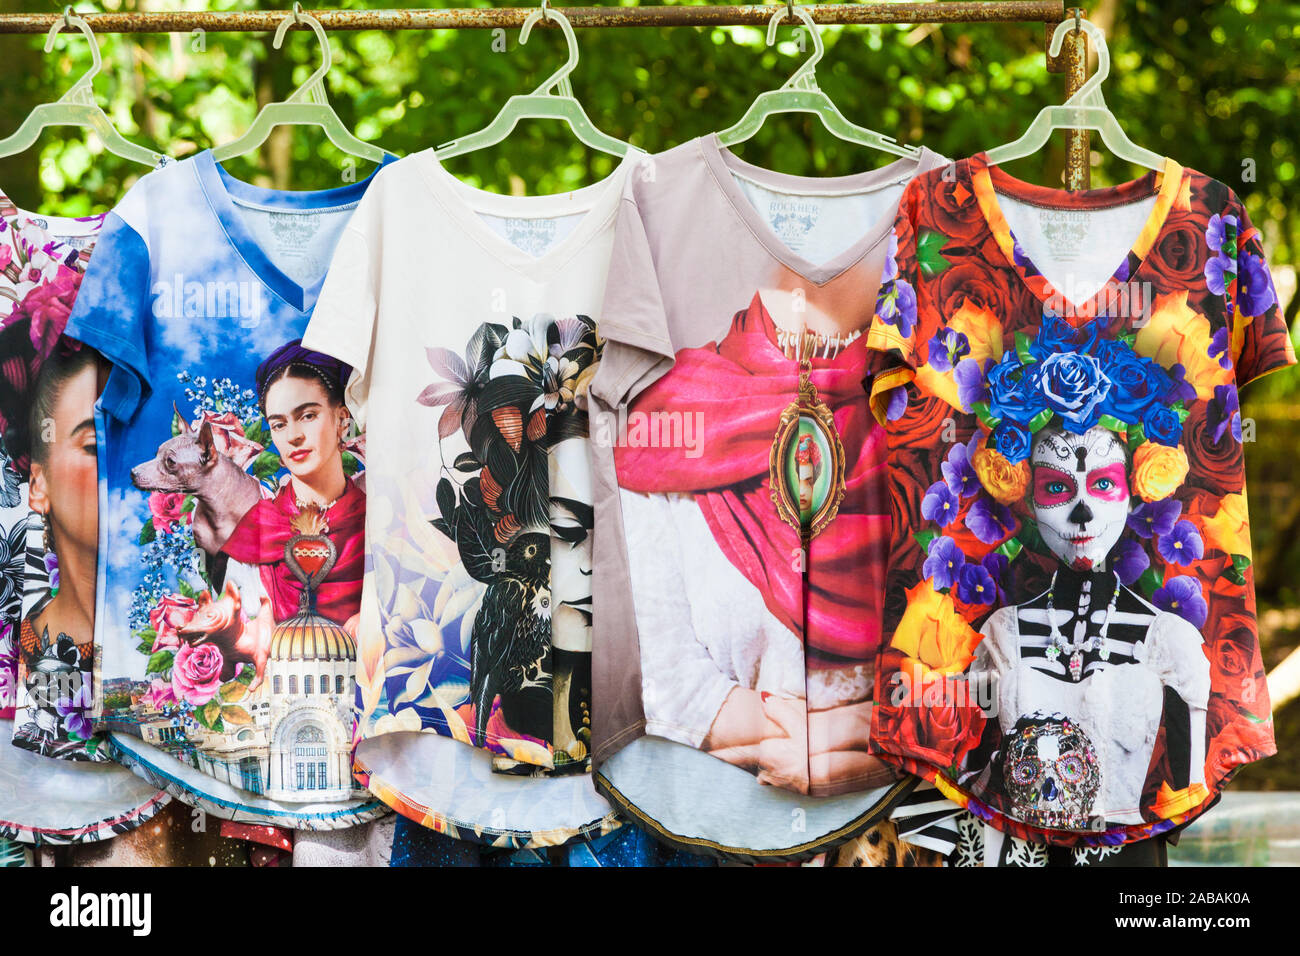 Souvenir marketplace on the grounds of the Chichen Itza cultural site on the Yucatan peninsula of Mexico Stock Photo